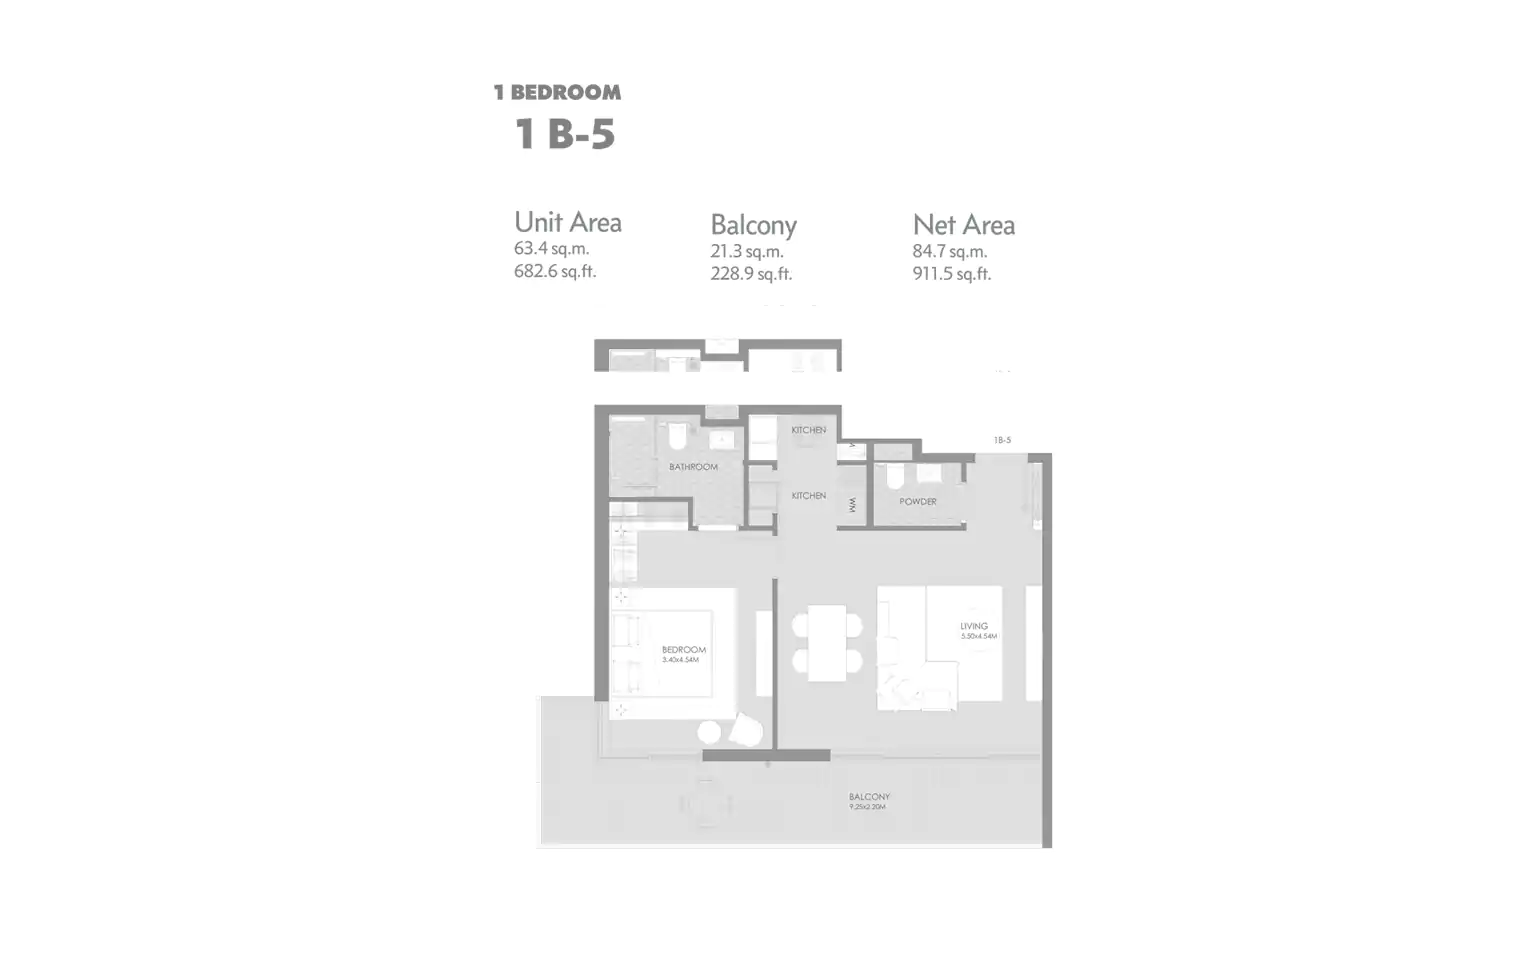 One Bedroom With Balcony 1B-5  Size : 682.6 Sq.ft.